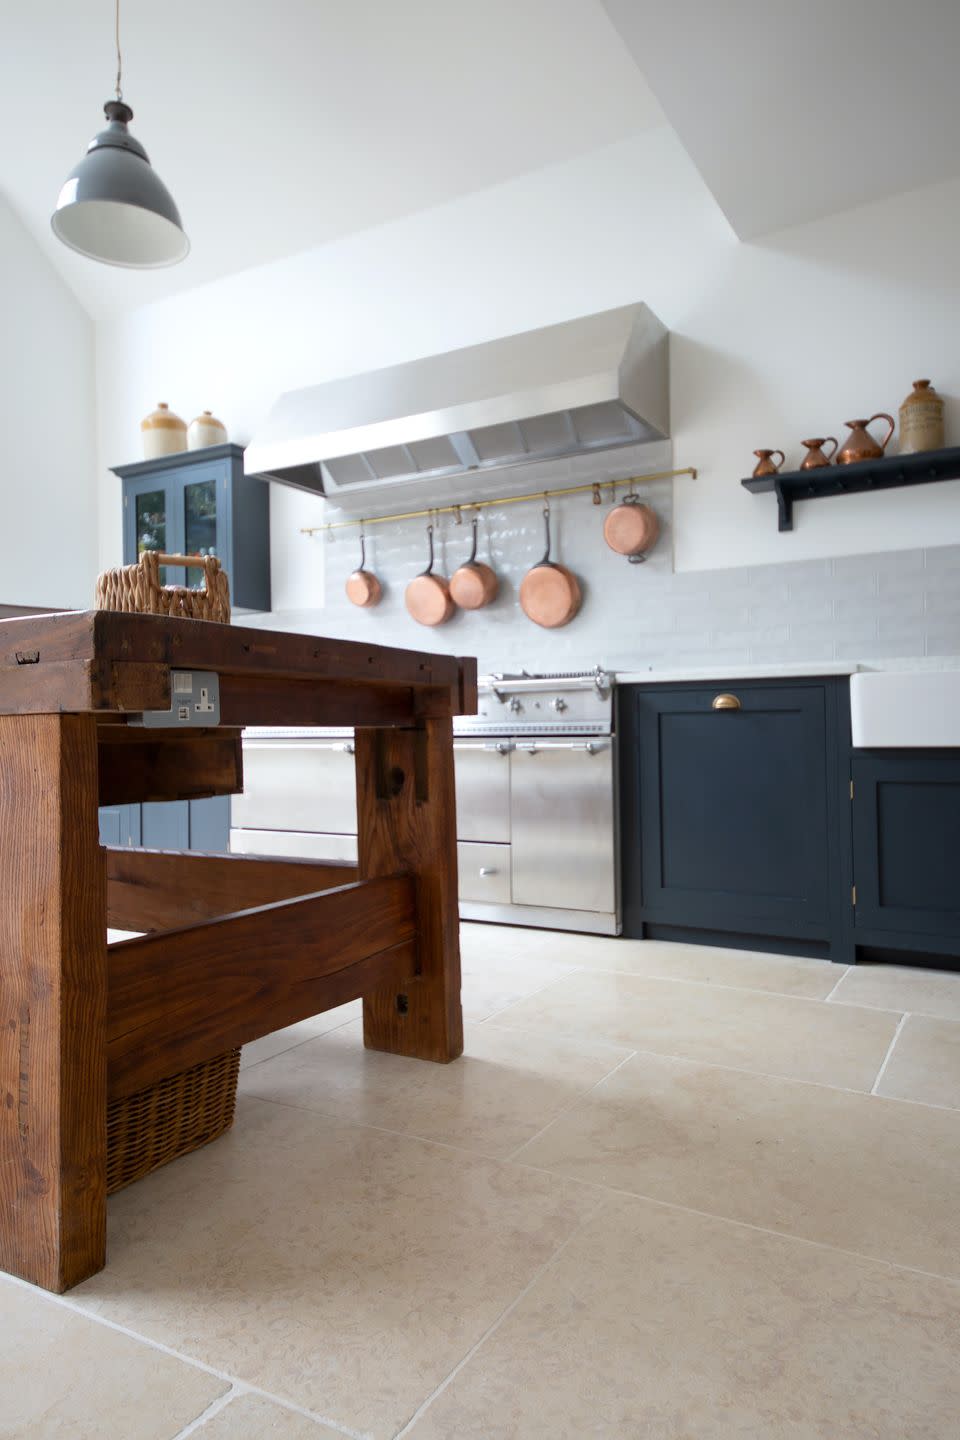 <p>For a high-traffic area like the kitchen, you need durable flooring which also looks good. The choice for 2022? Flagstone floor tiles.</p><p>Isabel Fernandez, Director of Quorn Stone, explains: 'For centuries, estates and country homes have used flagstone flooring, thanks to their hardwearing characteristics and classic appearance that have stood the test of time. Now more than ever, people are wanting to create this timeless look in their kitchens by choosing large format flagstones.' </p><p>Pictured: Monte Carlo tumbled limestone, prices start from £33, <a href="https://www.mystonefloor.com/" rel="nofollow noopener" target="_blank" data-ylk="slk:Quorn Stone" class="link ">Quorn Stone</a>. </p>